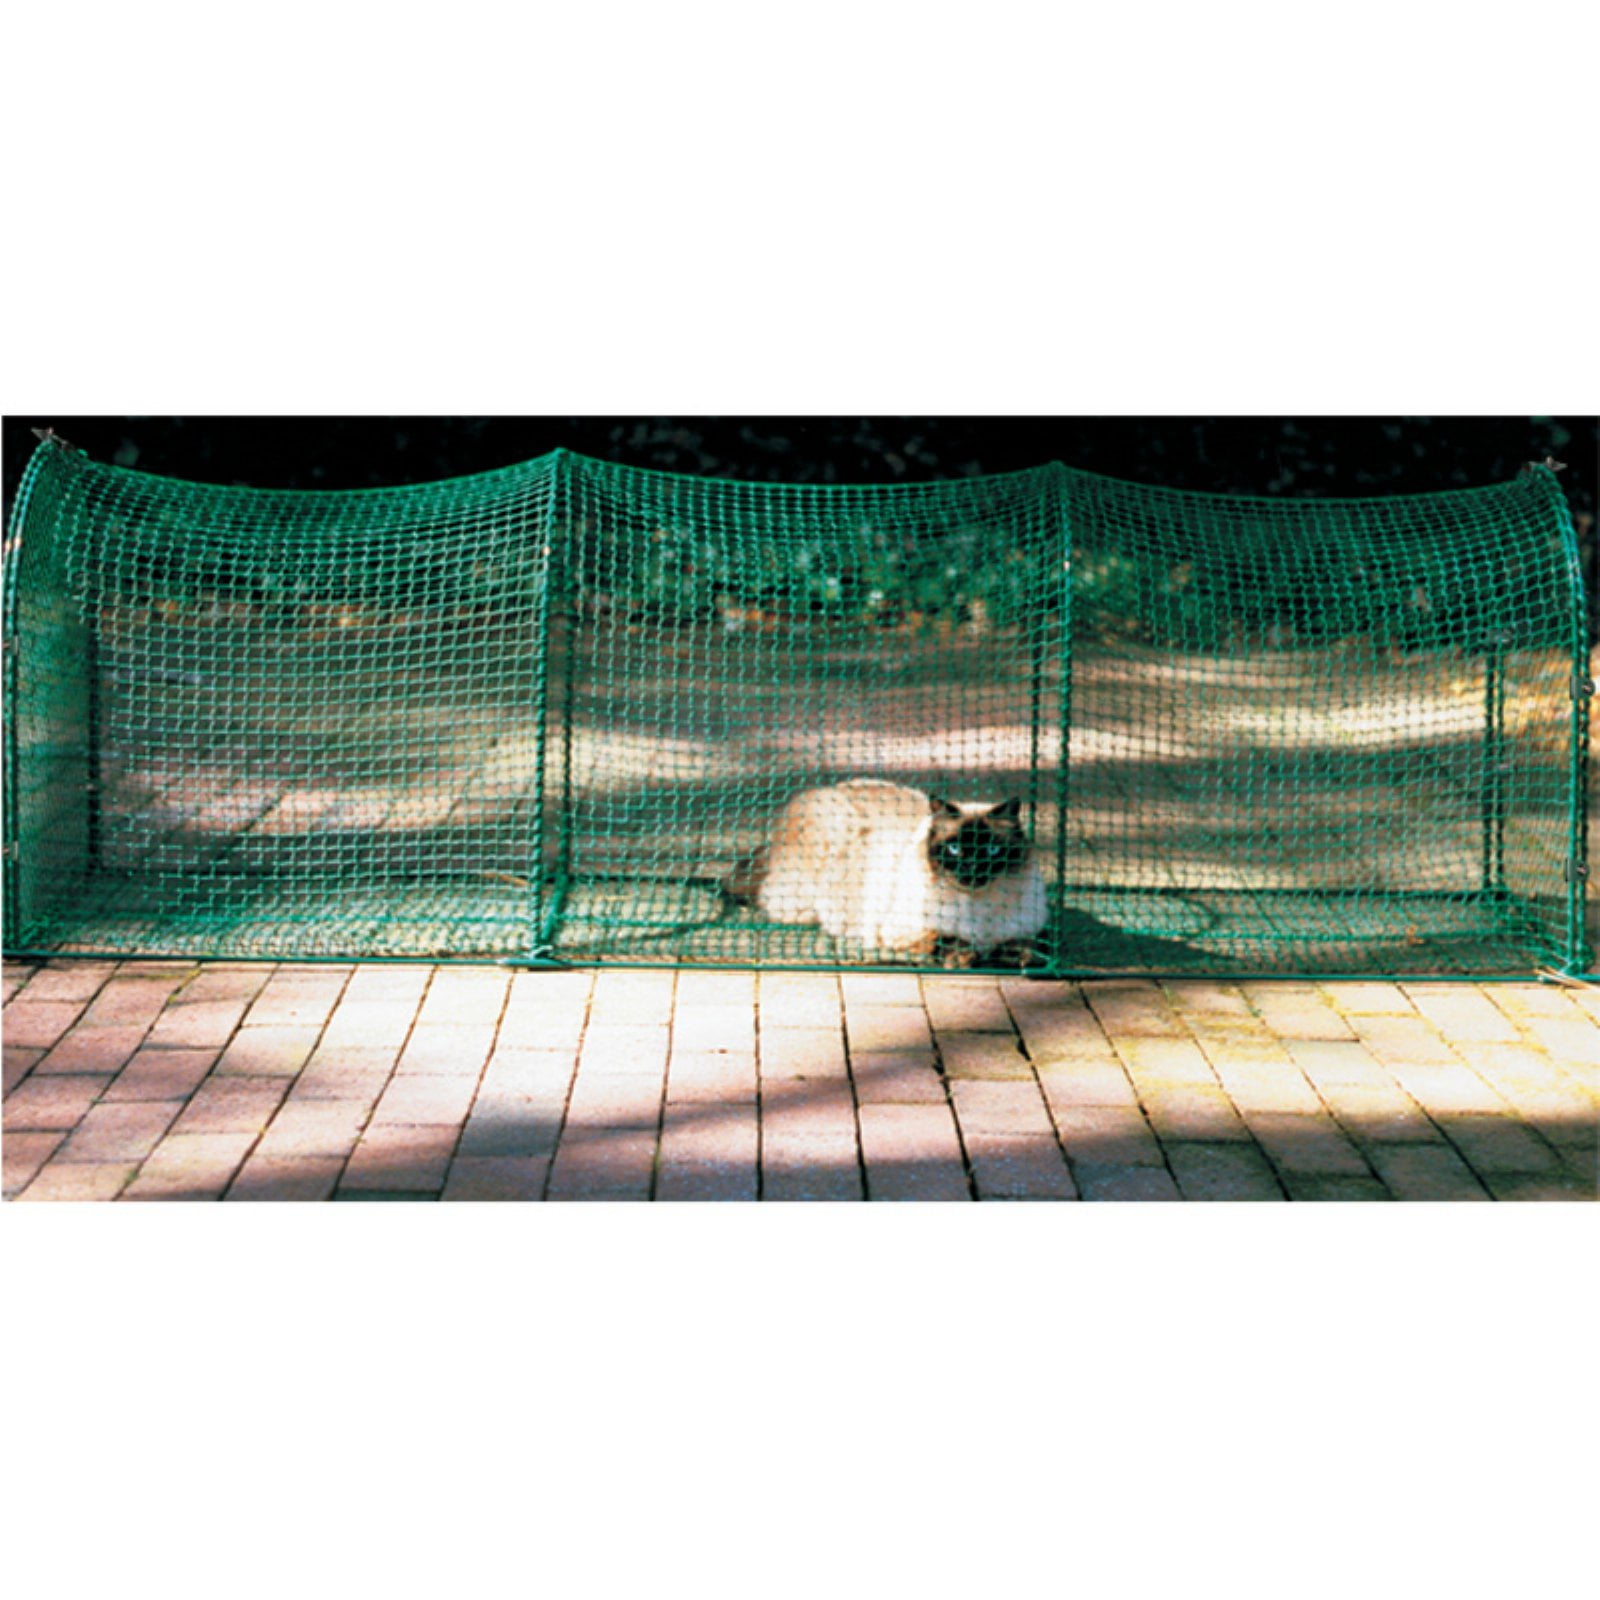 Kittywalk, Deck and Patio, Outdoor Cat Enclosure, Green, 72-in